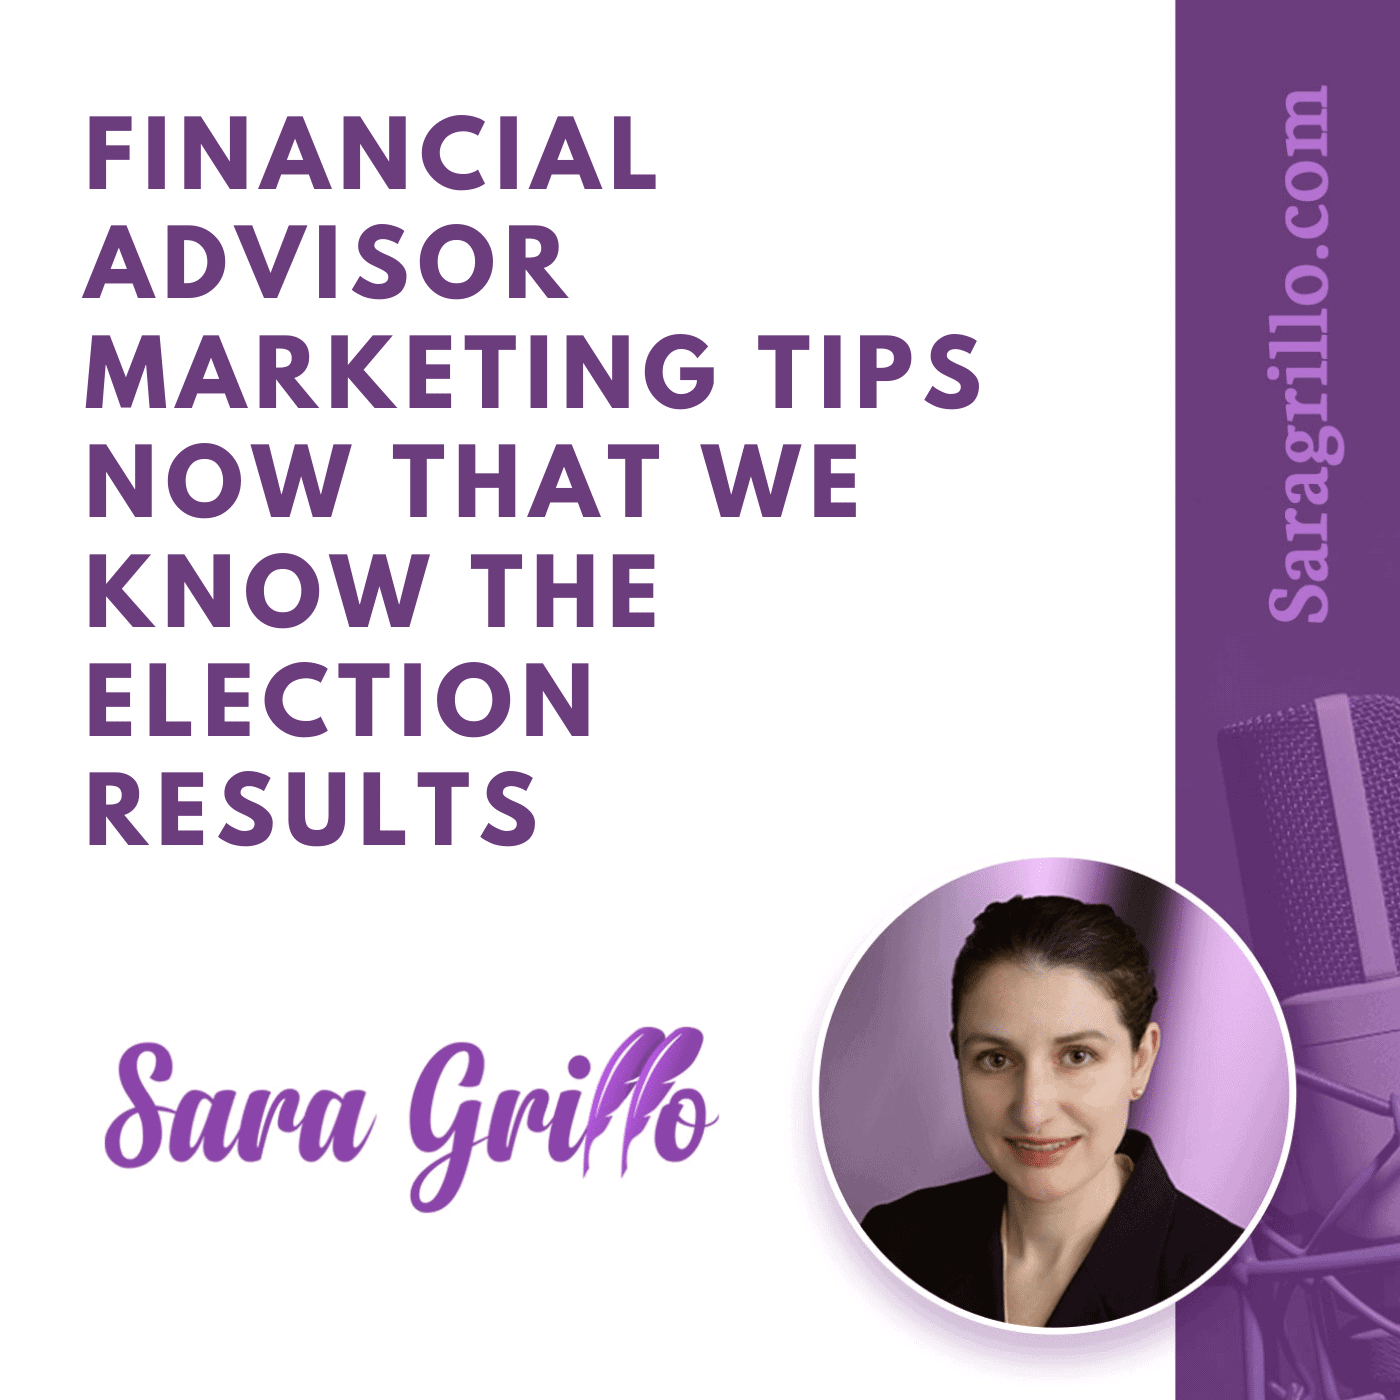 Here are some financial advisor marketing moves to make now that we know the election results